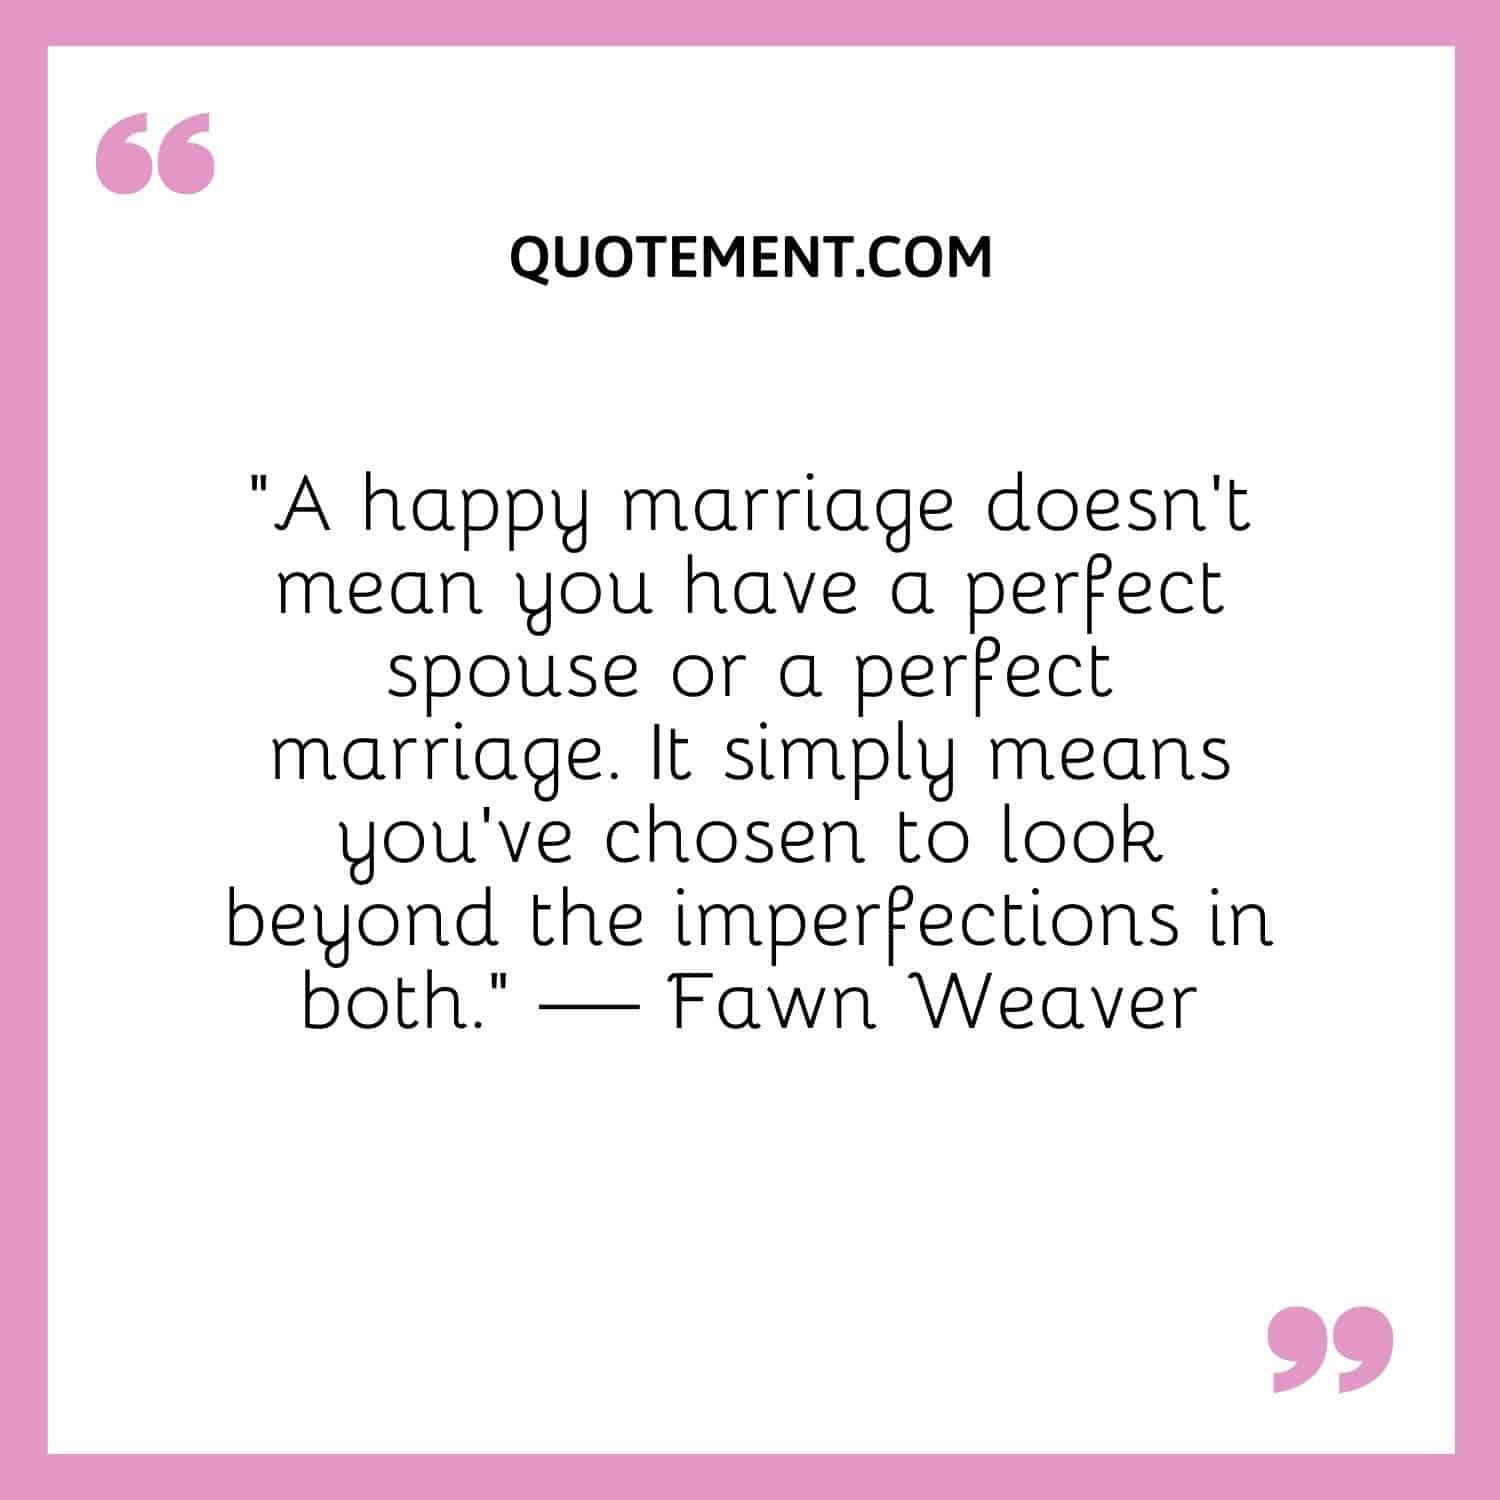 A happy marriage doesn’t mean you have a perfect spouse or a perfect marriage